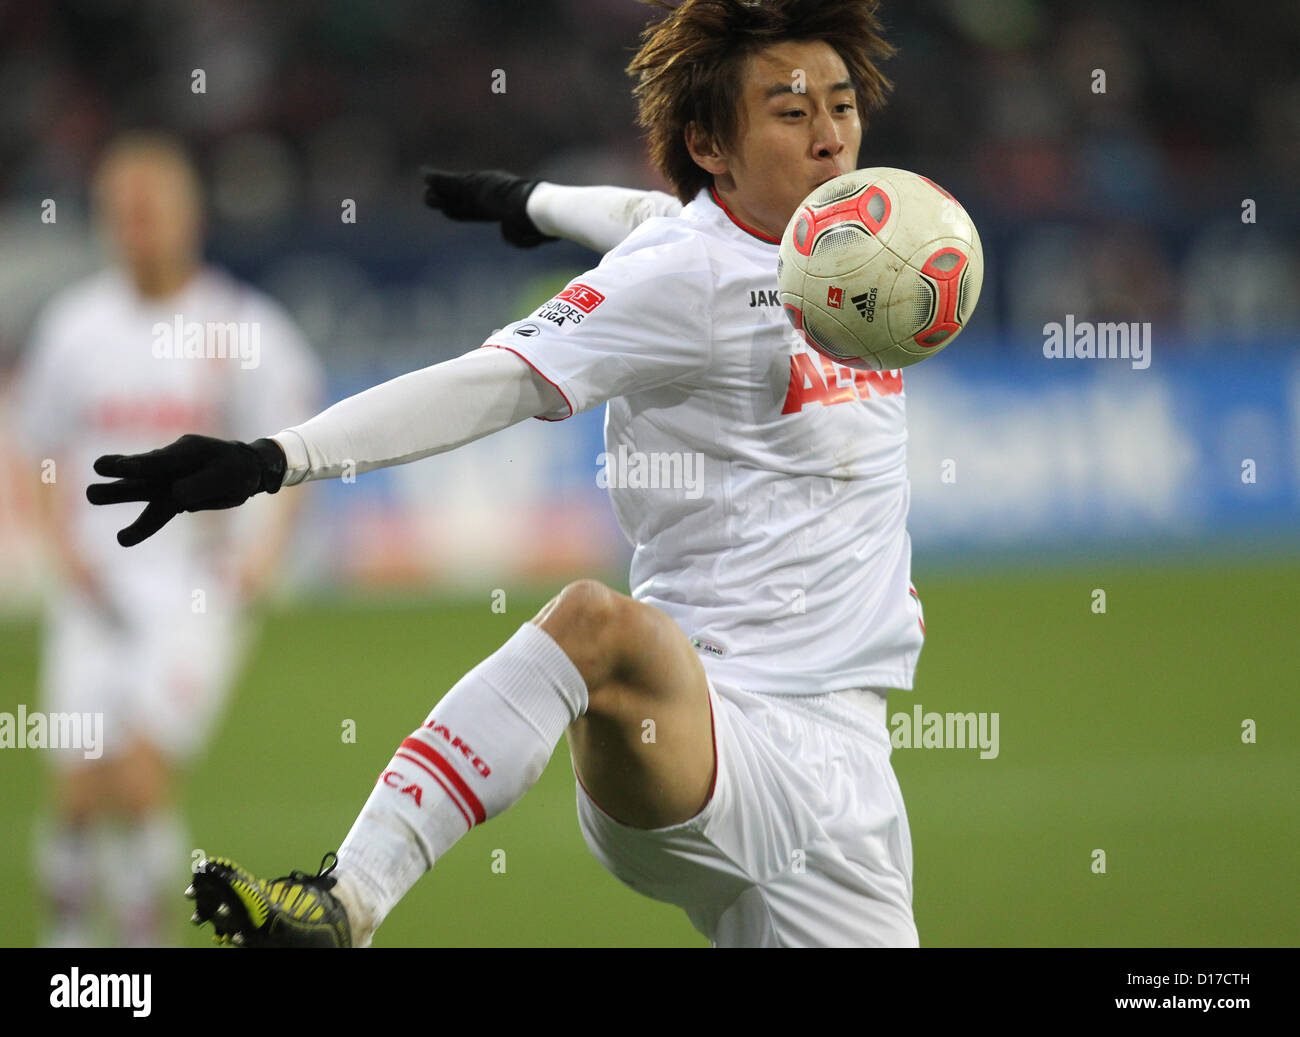 Augsburg's Ja-Cheol Koo plays the ball during the German Bundesliga match between FC Augsburg and FC Bayern Munich at SGL-Arena in Augsburg, germany, 08 December 2012. Photo: Karl-Josef Hildenbrand Stock Photo